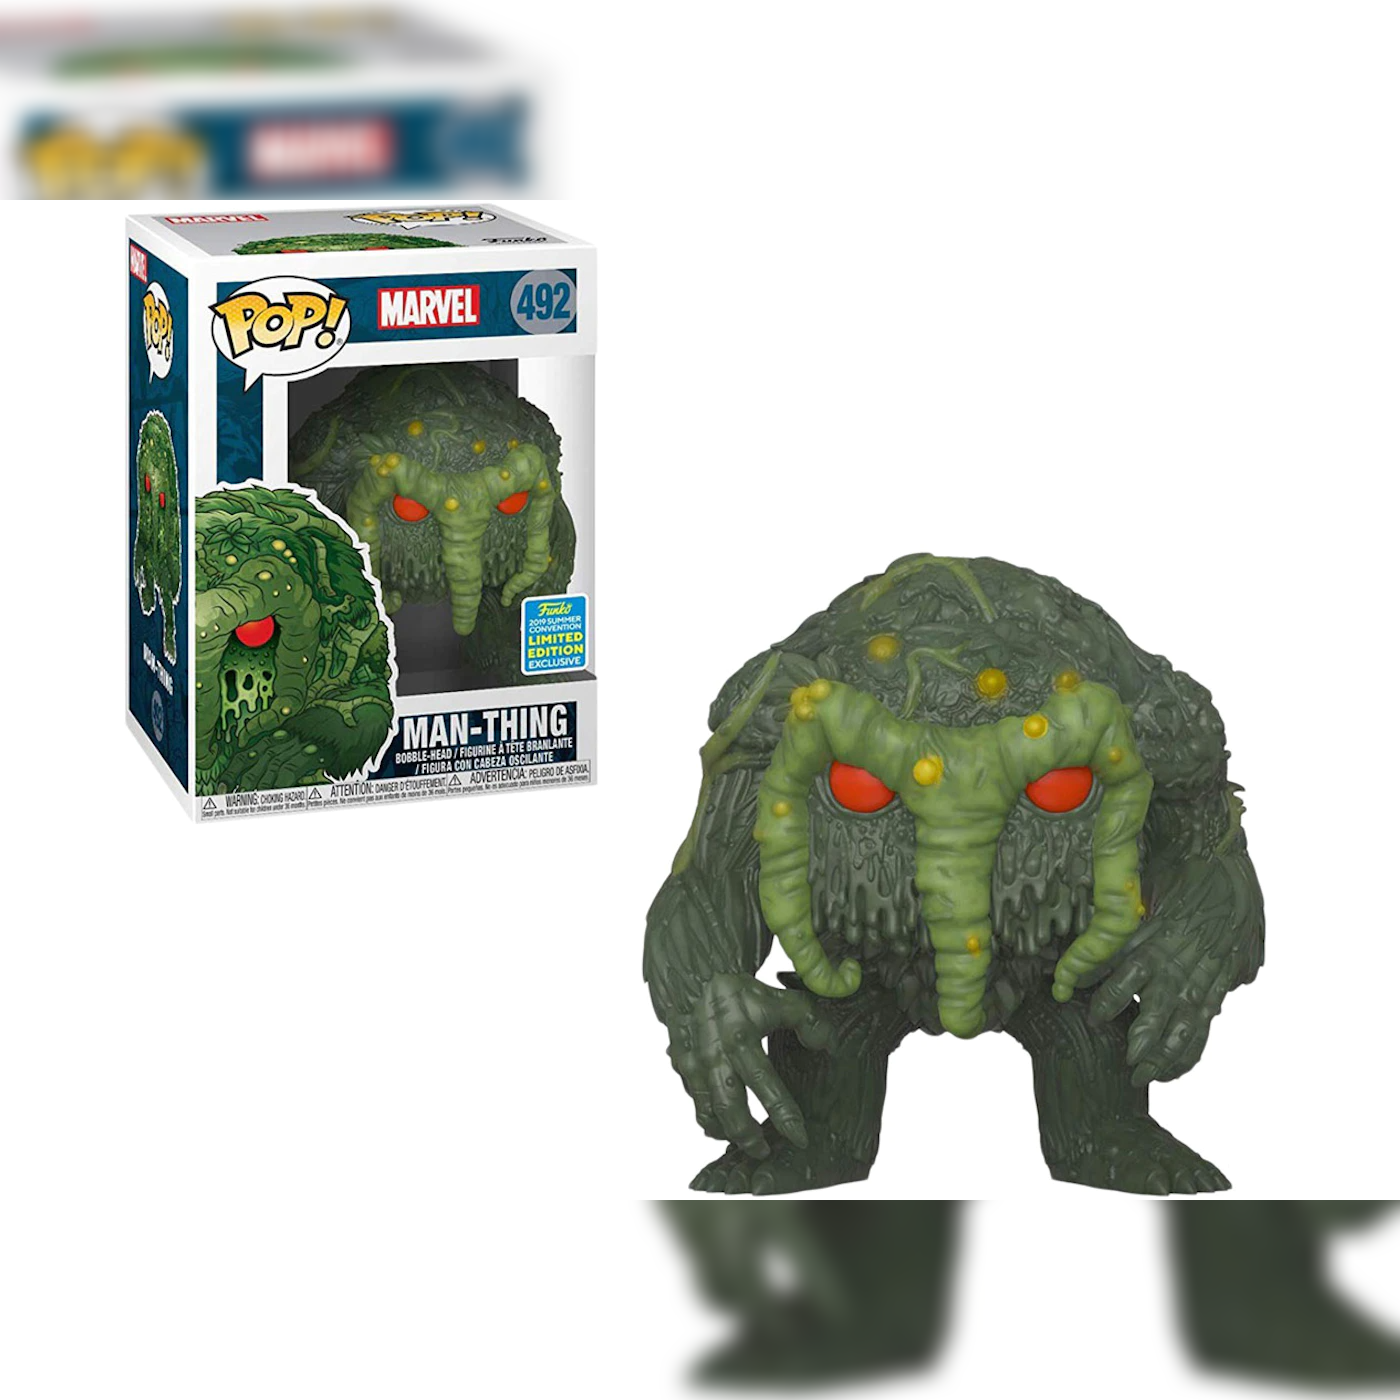 Man Thing 2019 summer con exclusive